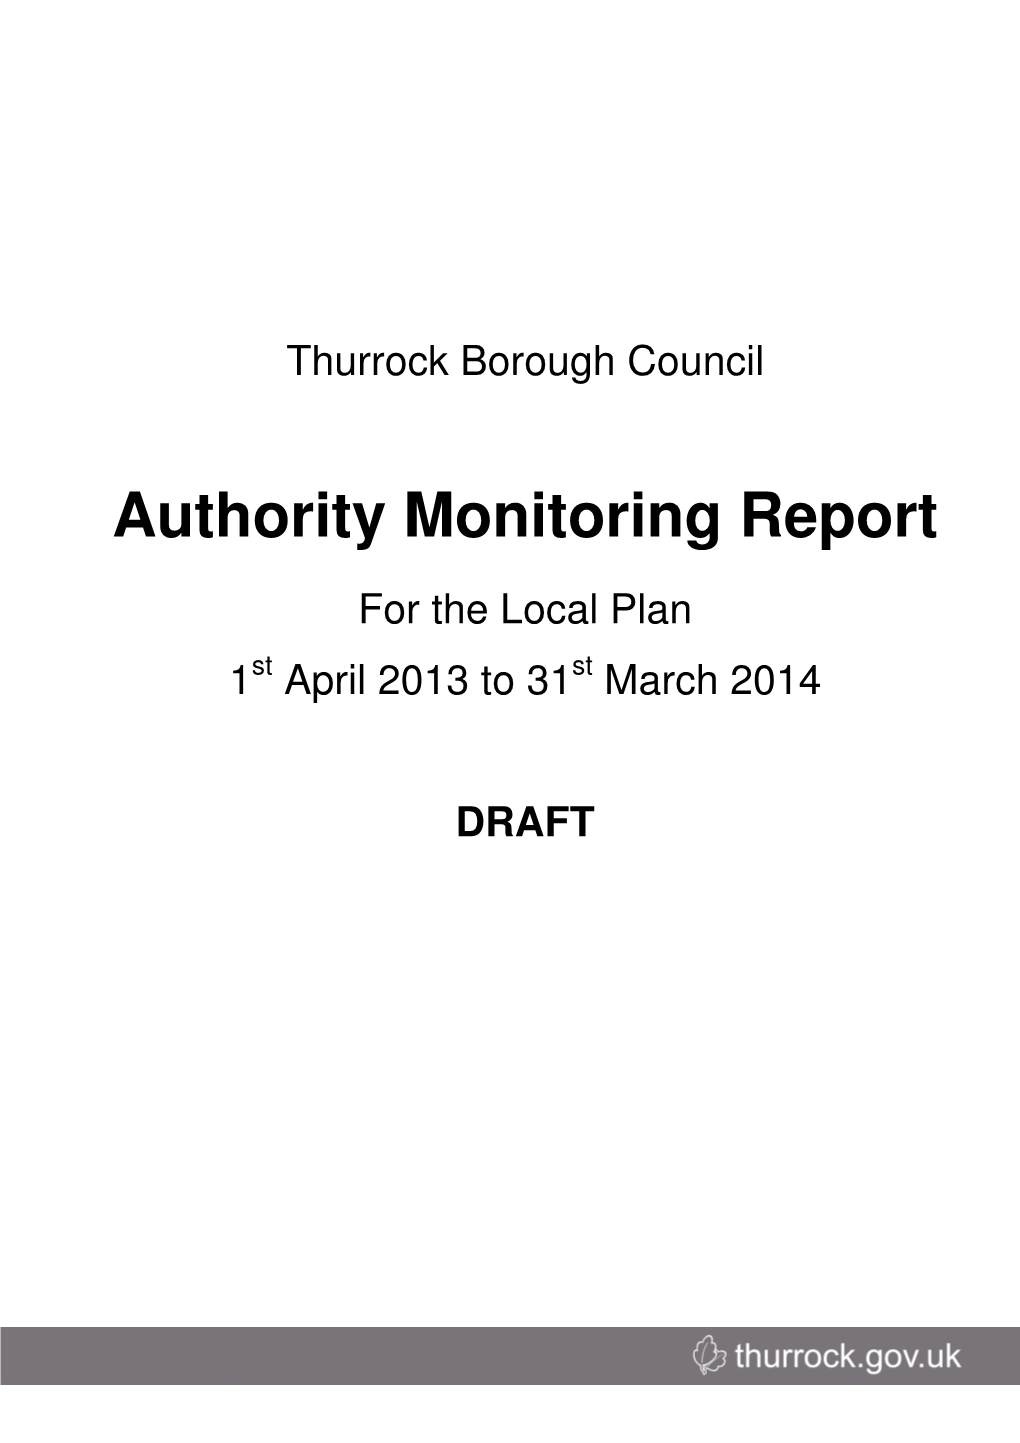 Authority Monitoring Report for the Local Plan 1St April 2013 to 31 St March 2014